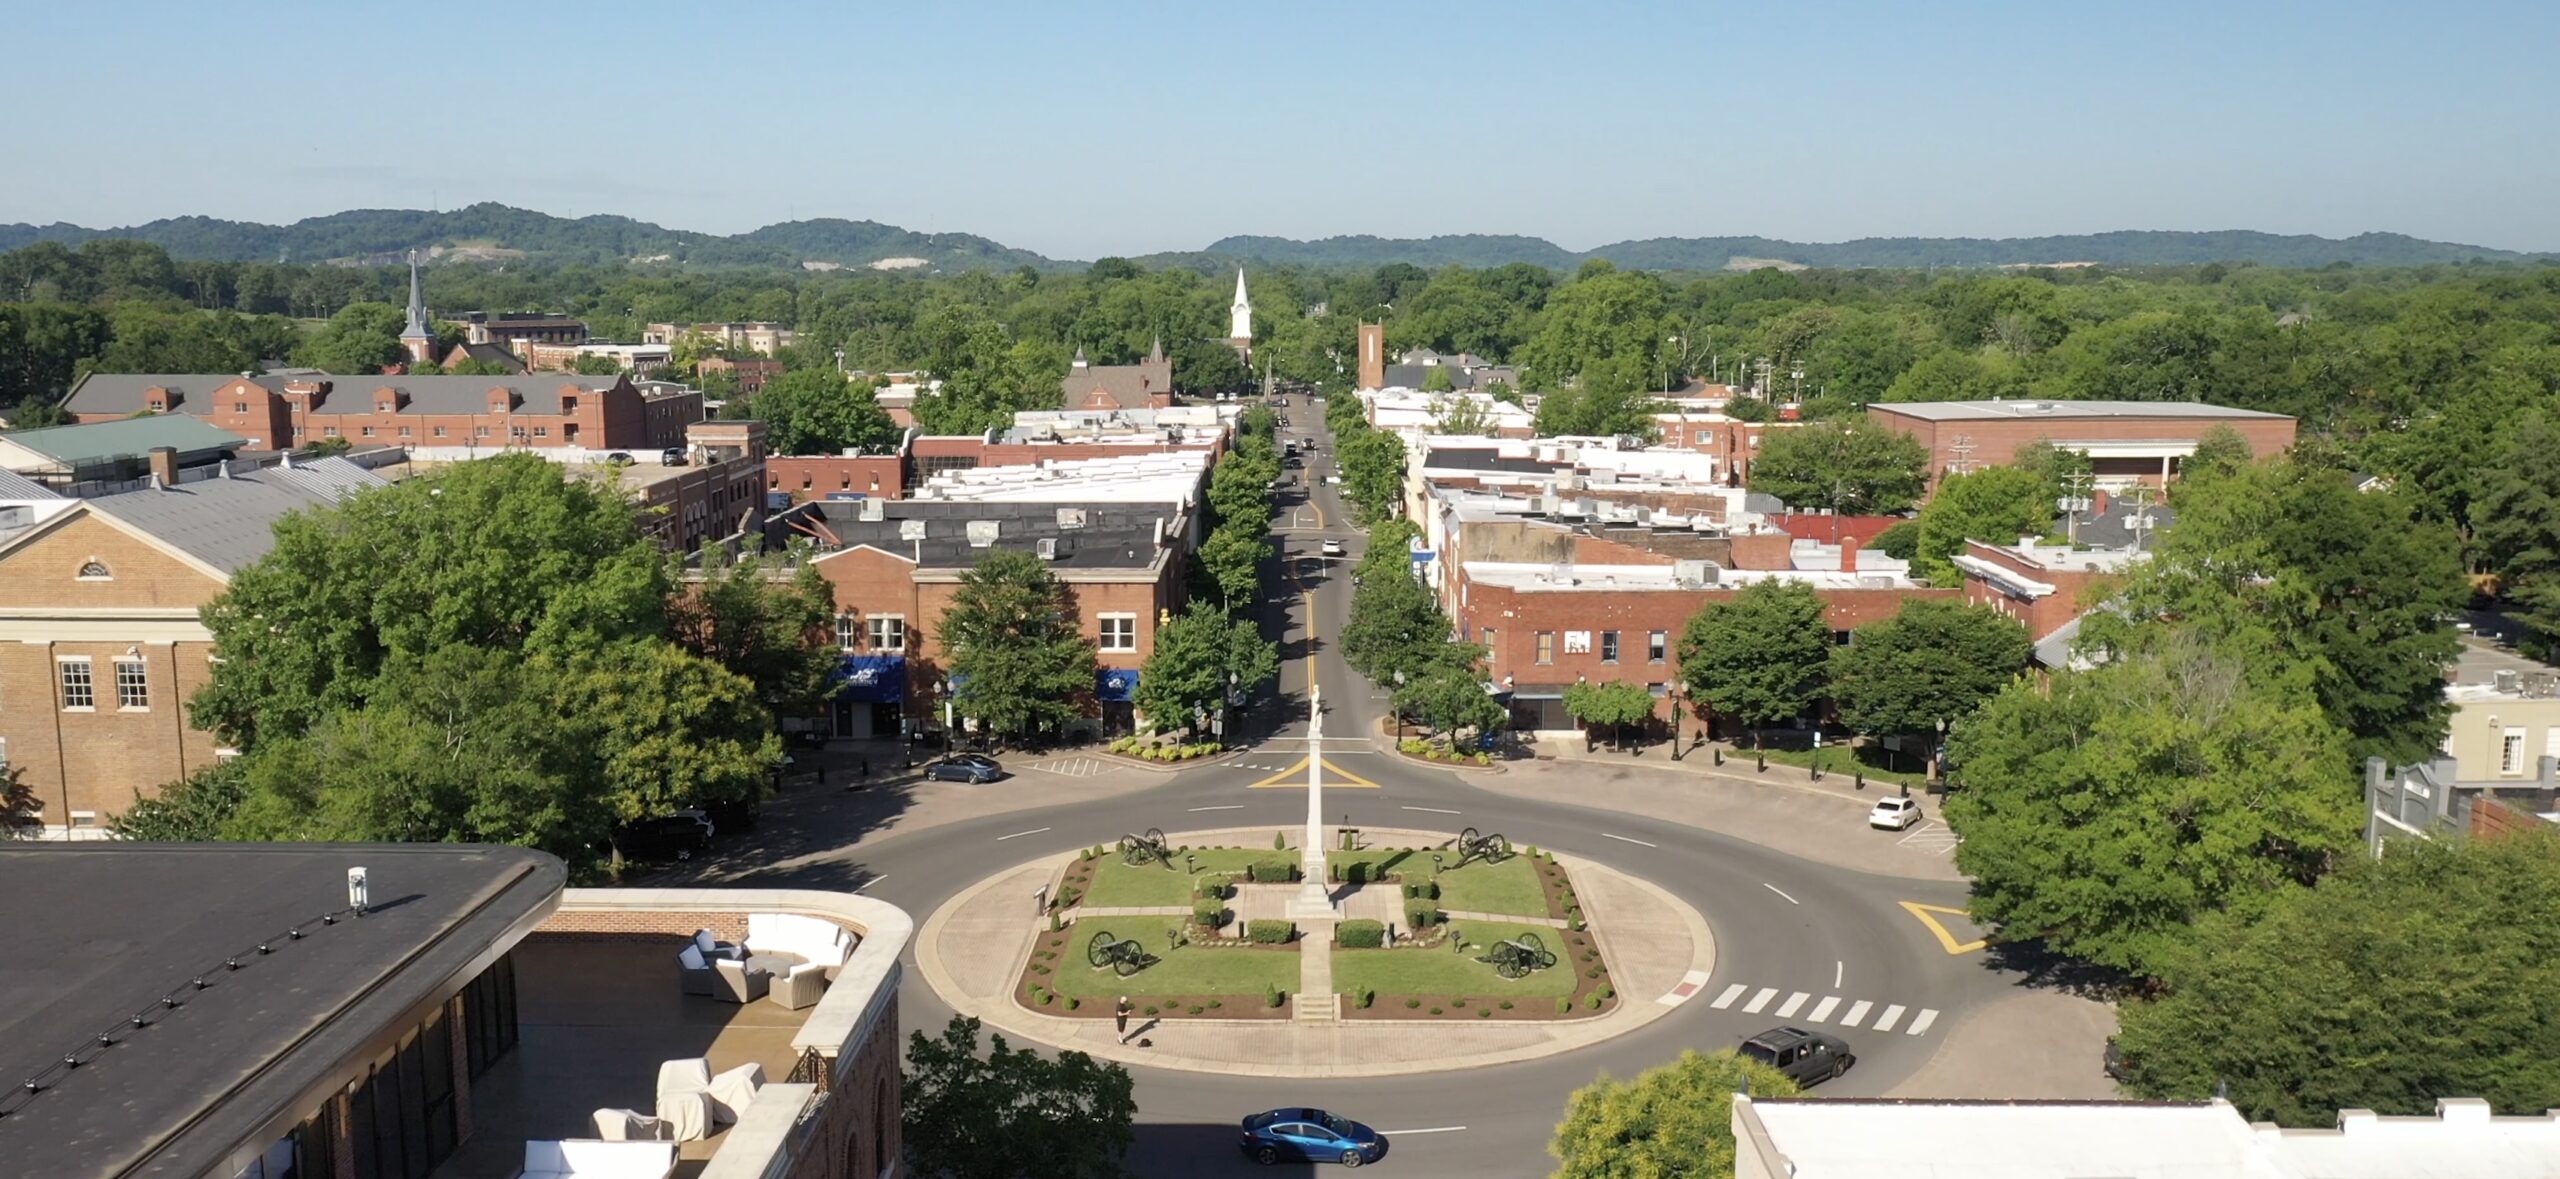 Downtown Franklin TN Arial View - FranklinIs